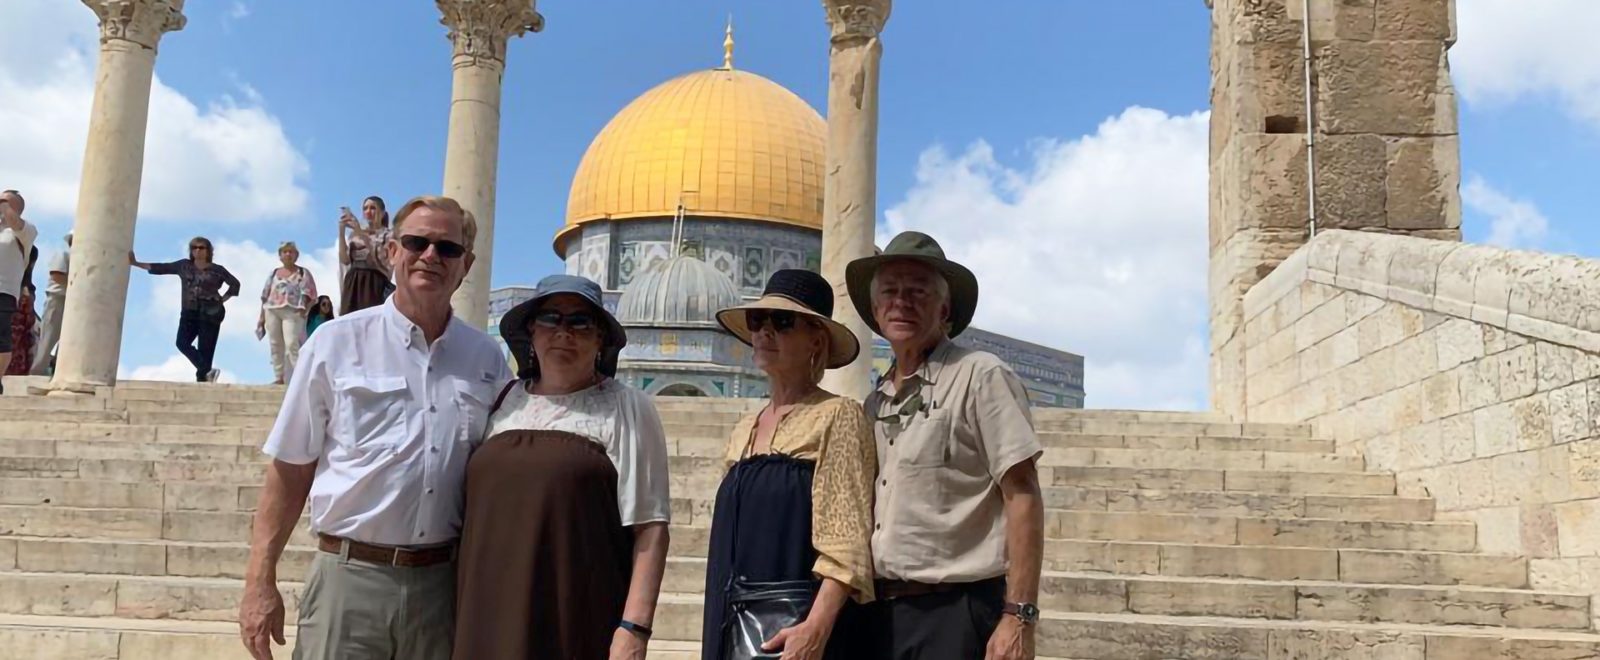 5 things to do in holy land tour 2019 2020